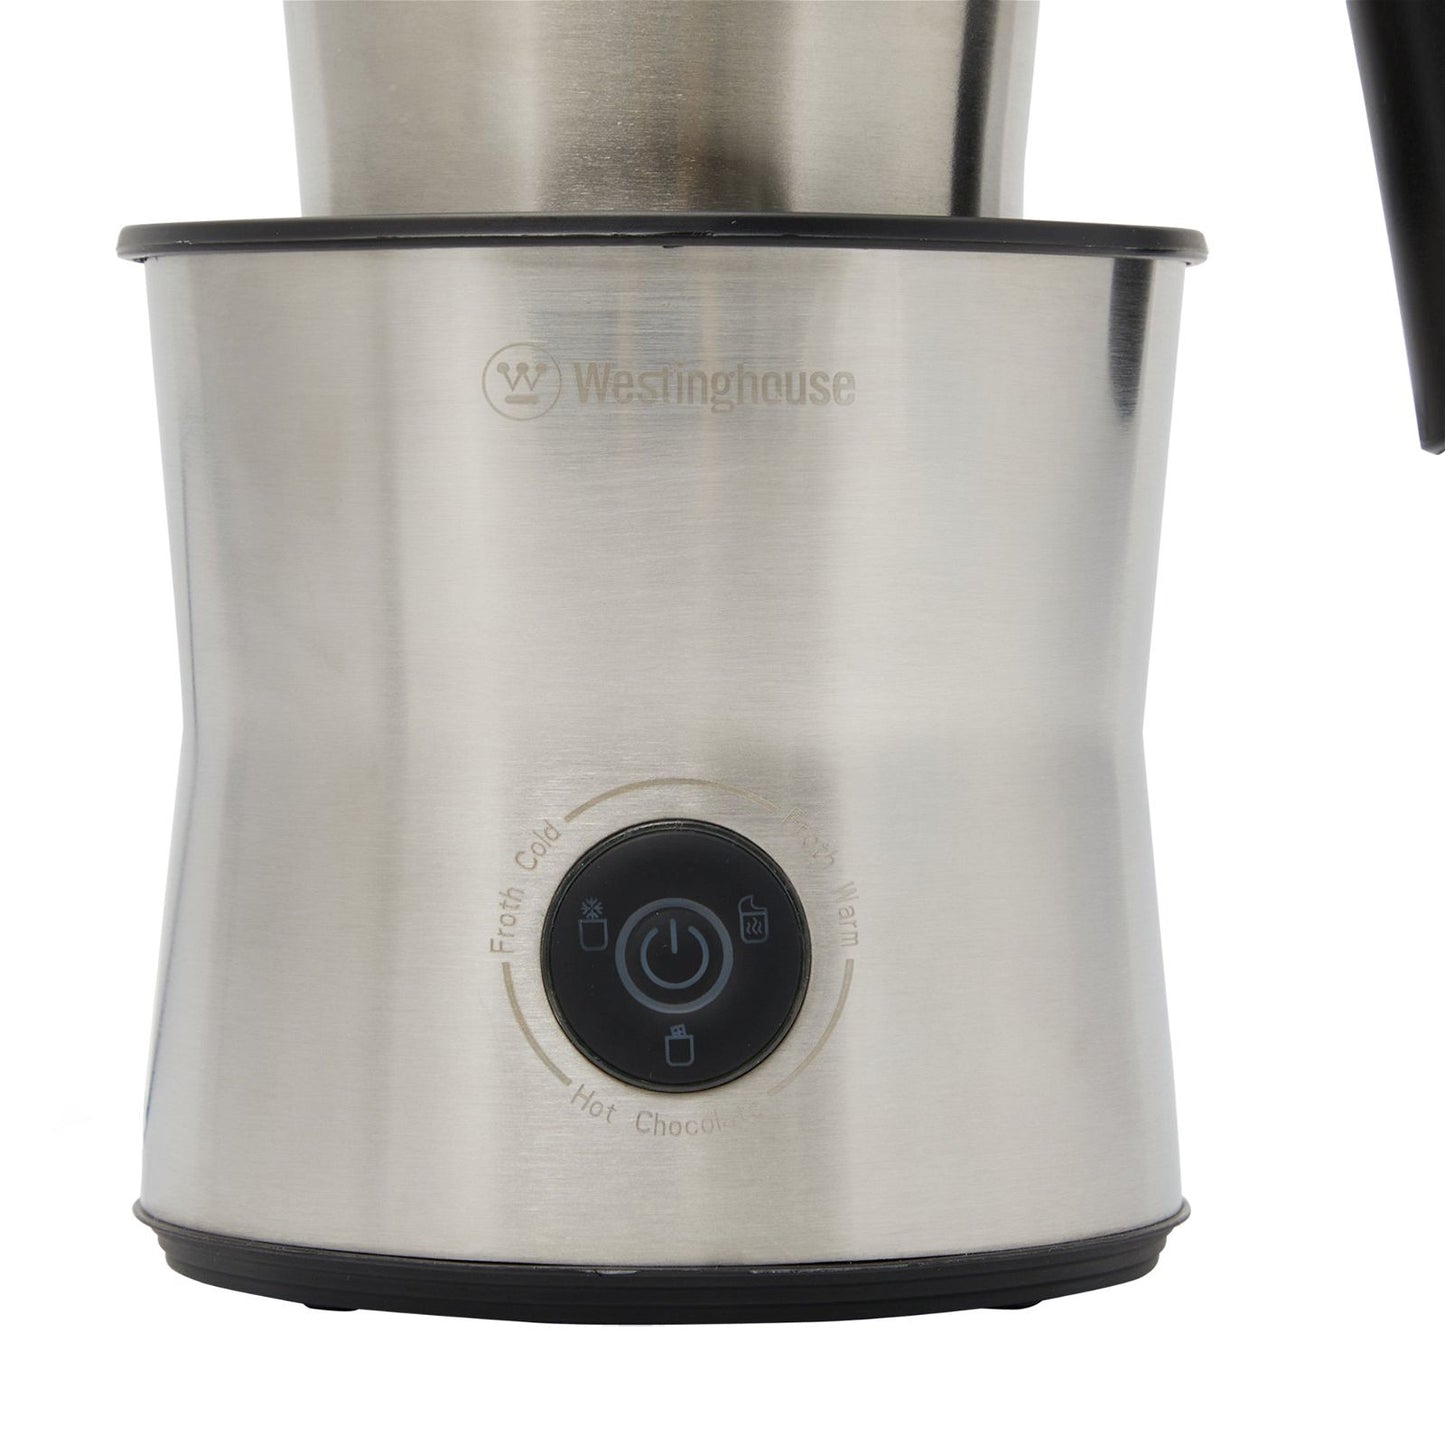 Westinghouse Milk Frother 300ml Stainless Steel -  -  